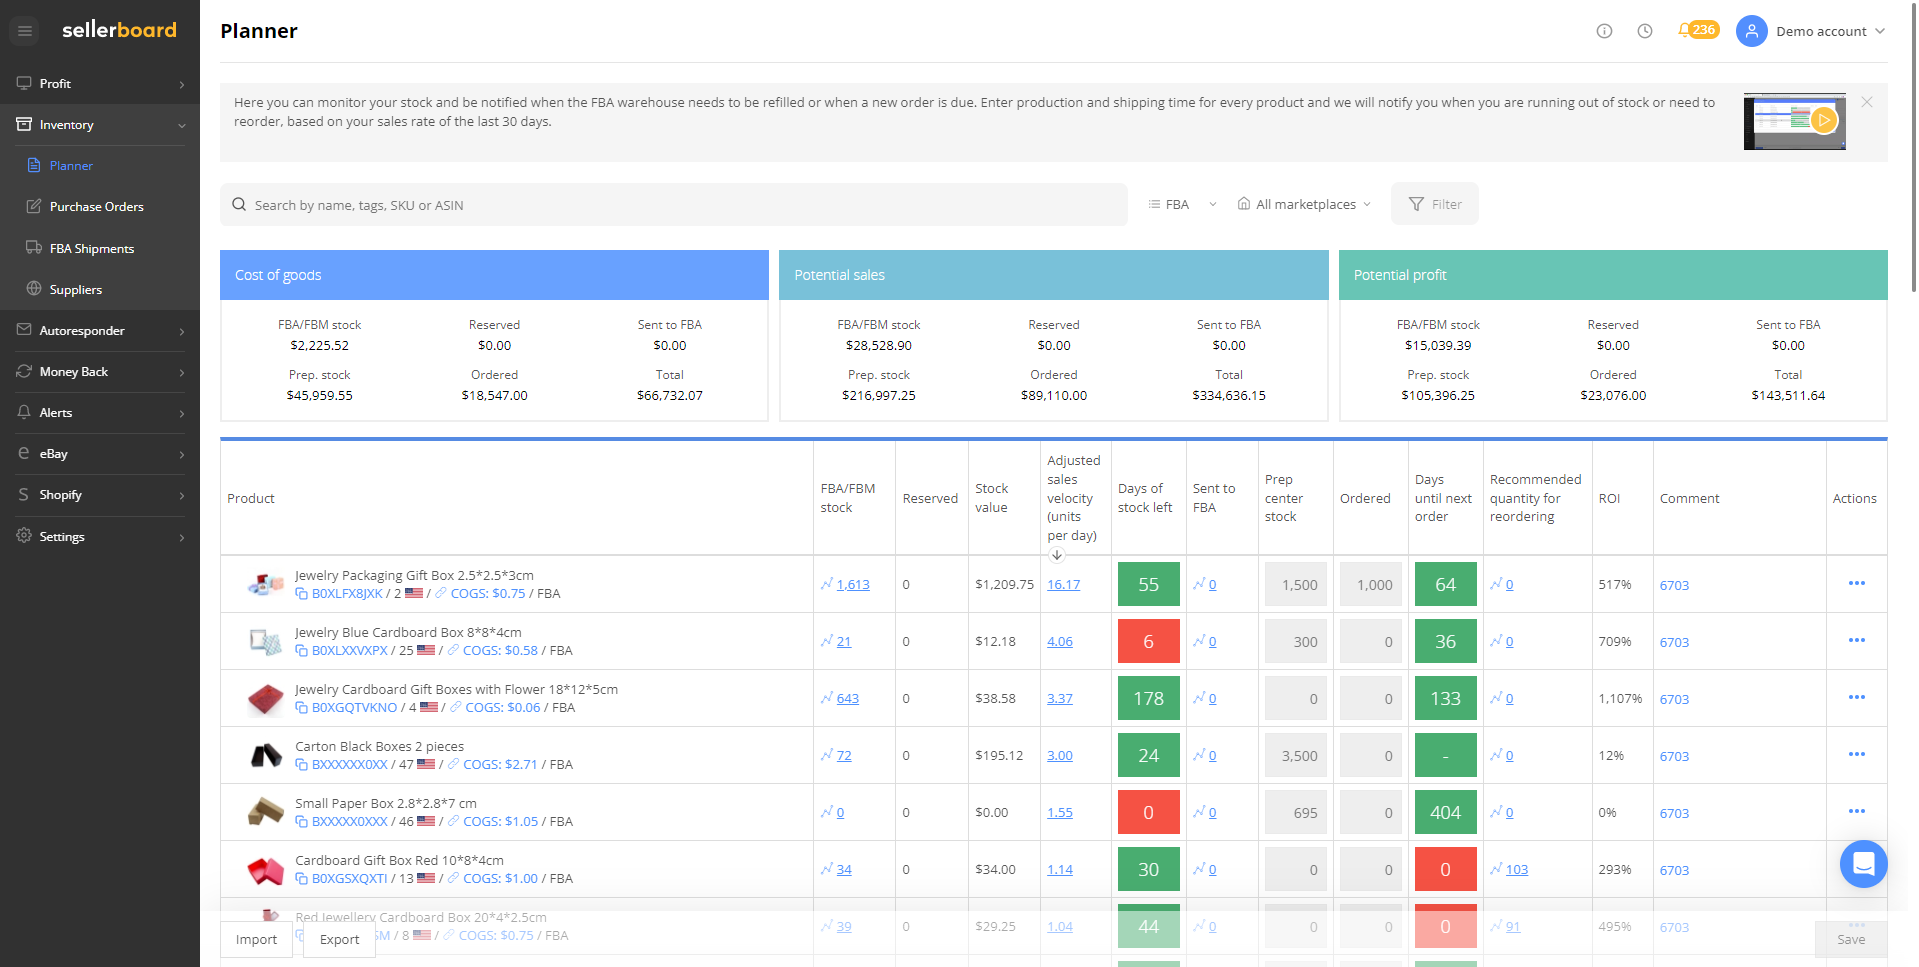 Easily manage inventory and never run out of stock. Get notified about stock shortage estimates in advance, distribute your Cost of Goods by batch and plan your Purchase Orders in one easy-to-use dashboard.